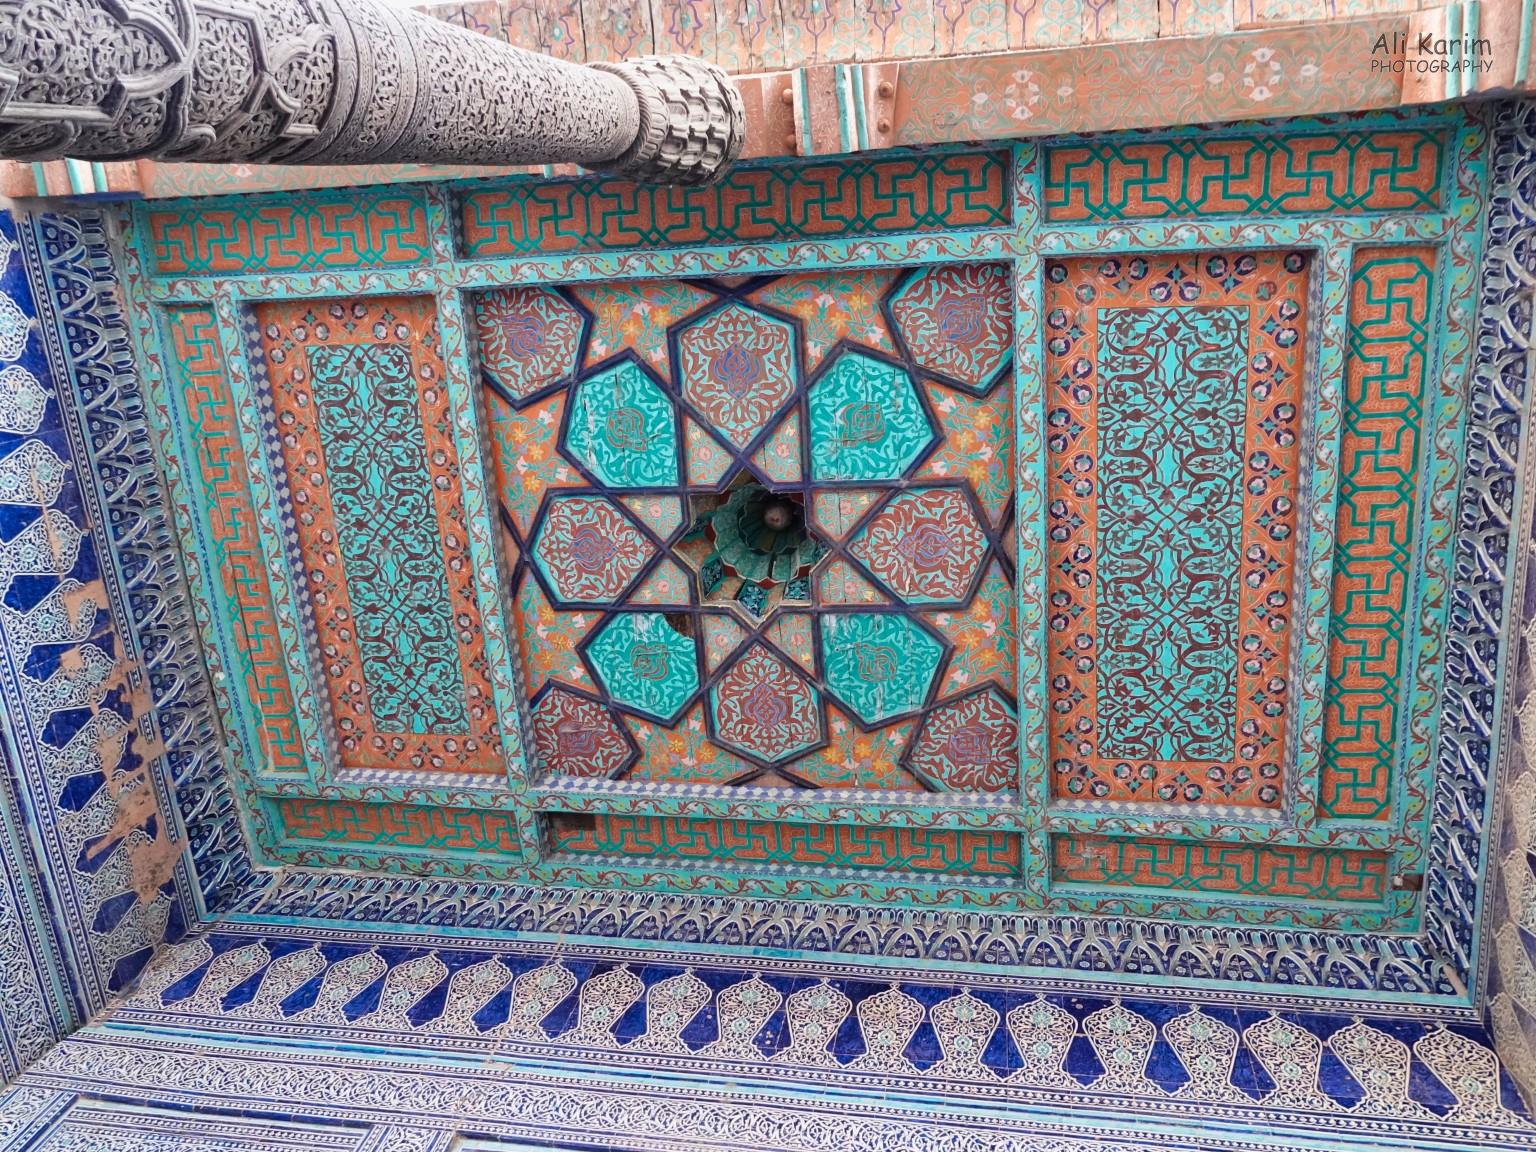 Khiva, Oct 2019, Beautiful tilework on ceiling of an alcove inside the Tosh-Hovli Palace; the home of the Khan of Khiva